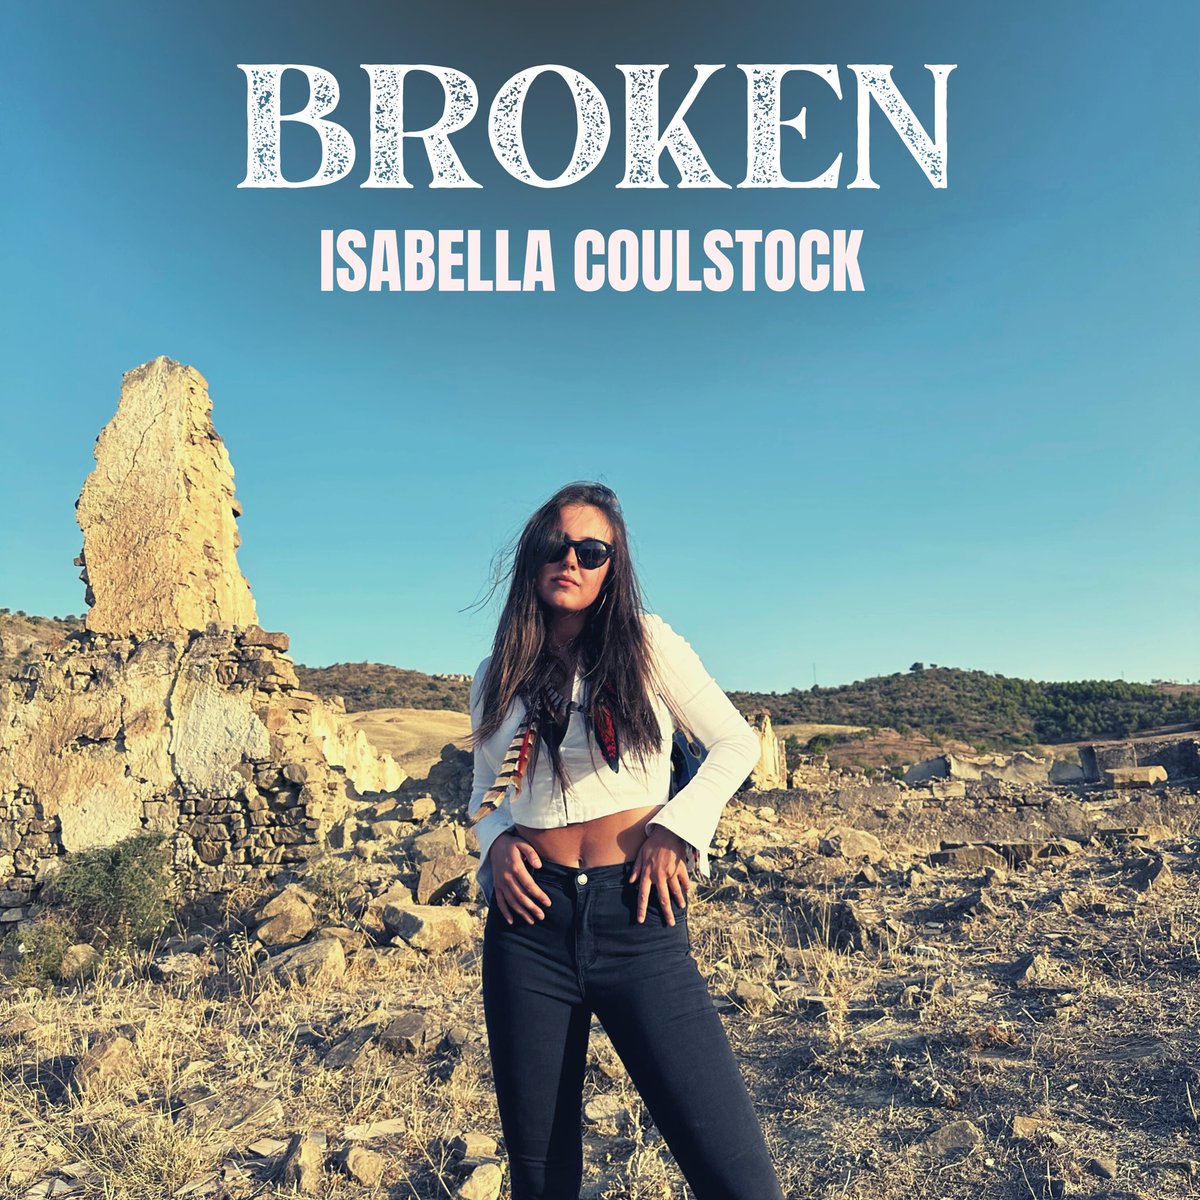 💫 BROKEN IS OFFICIALLY OUT NOW!! 💫 Available on all streaming platforms, go have a listen! Written by @ChazJankel and myself….I absolutely love this song and so excited that it’s finally out there in the world for you all to hear! Xx 🥰😍🫶 Link in bio!